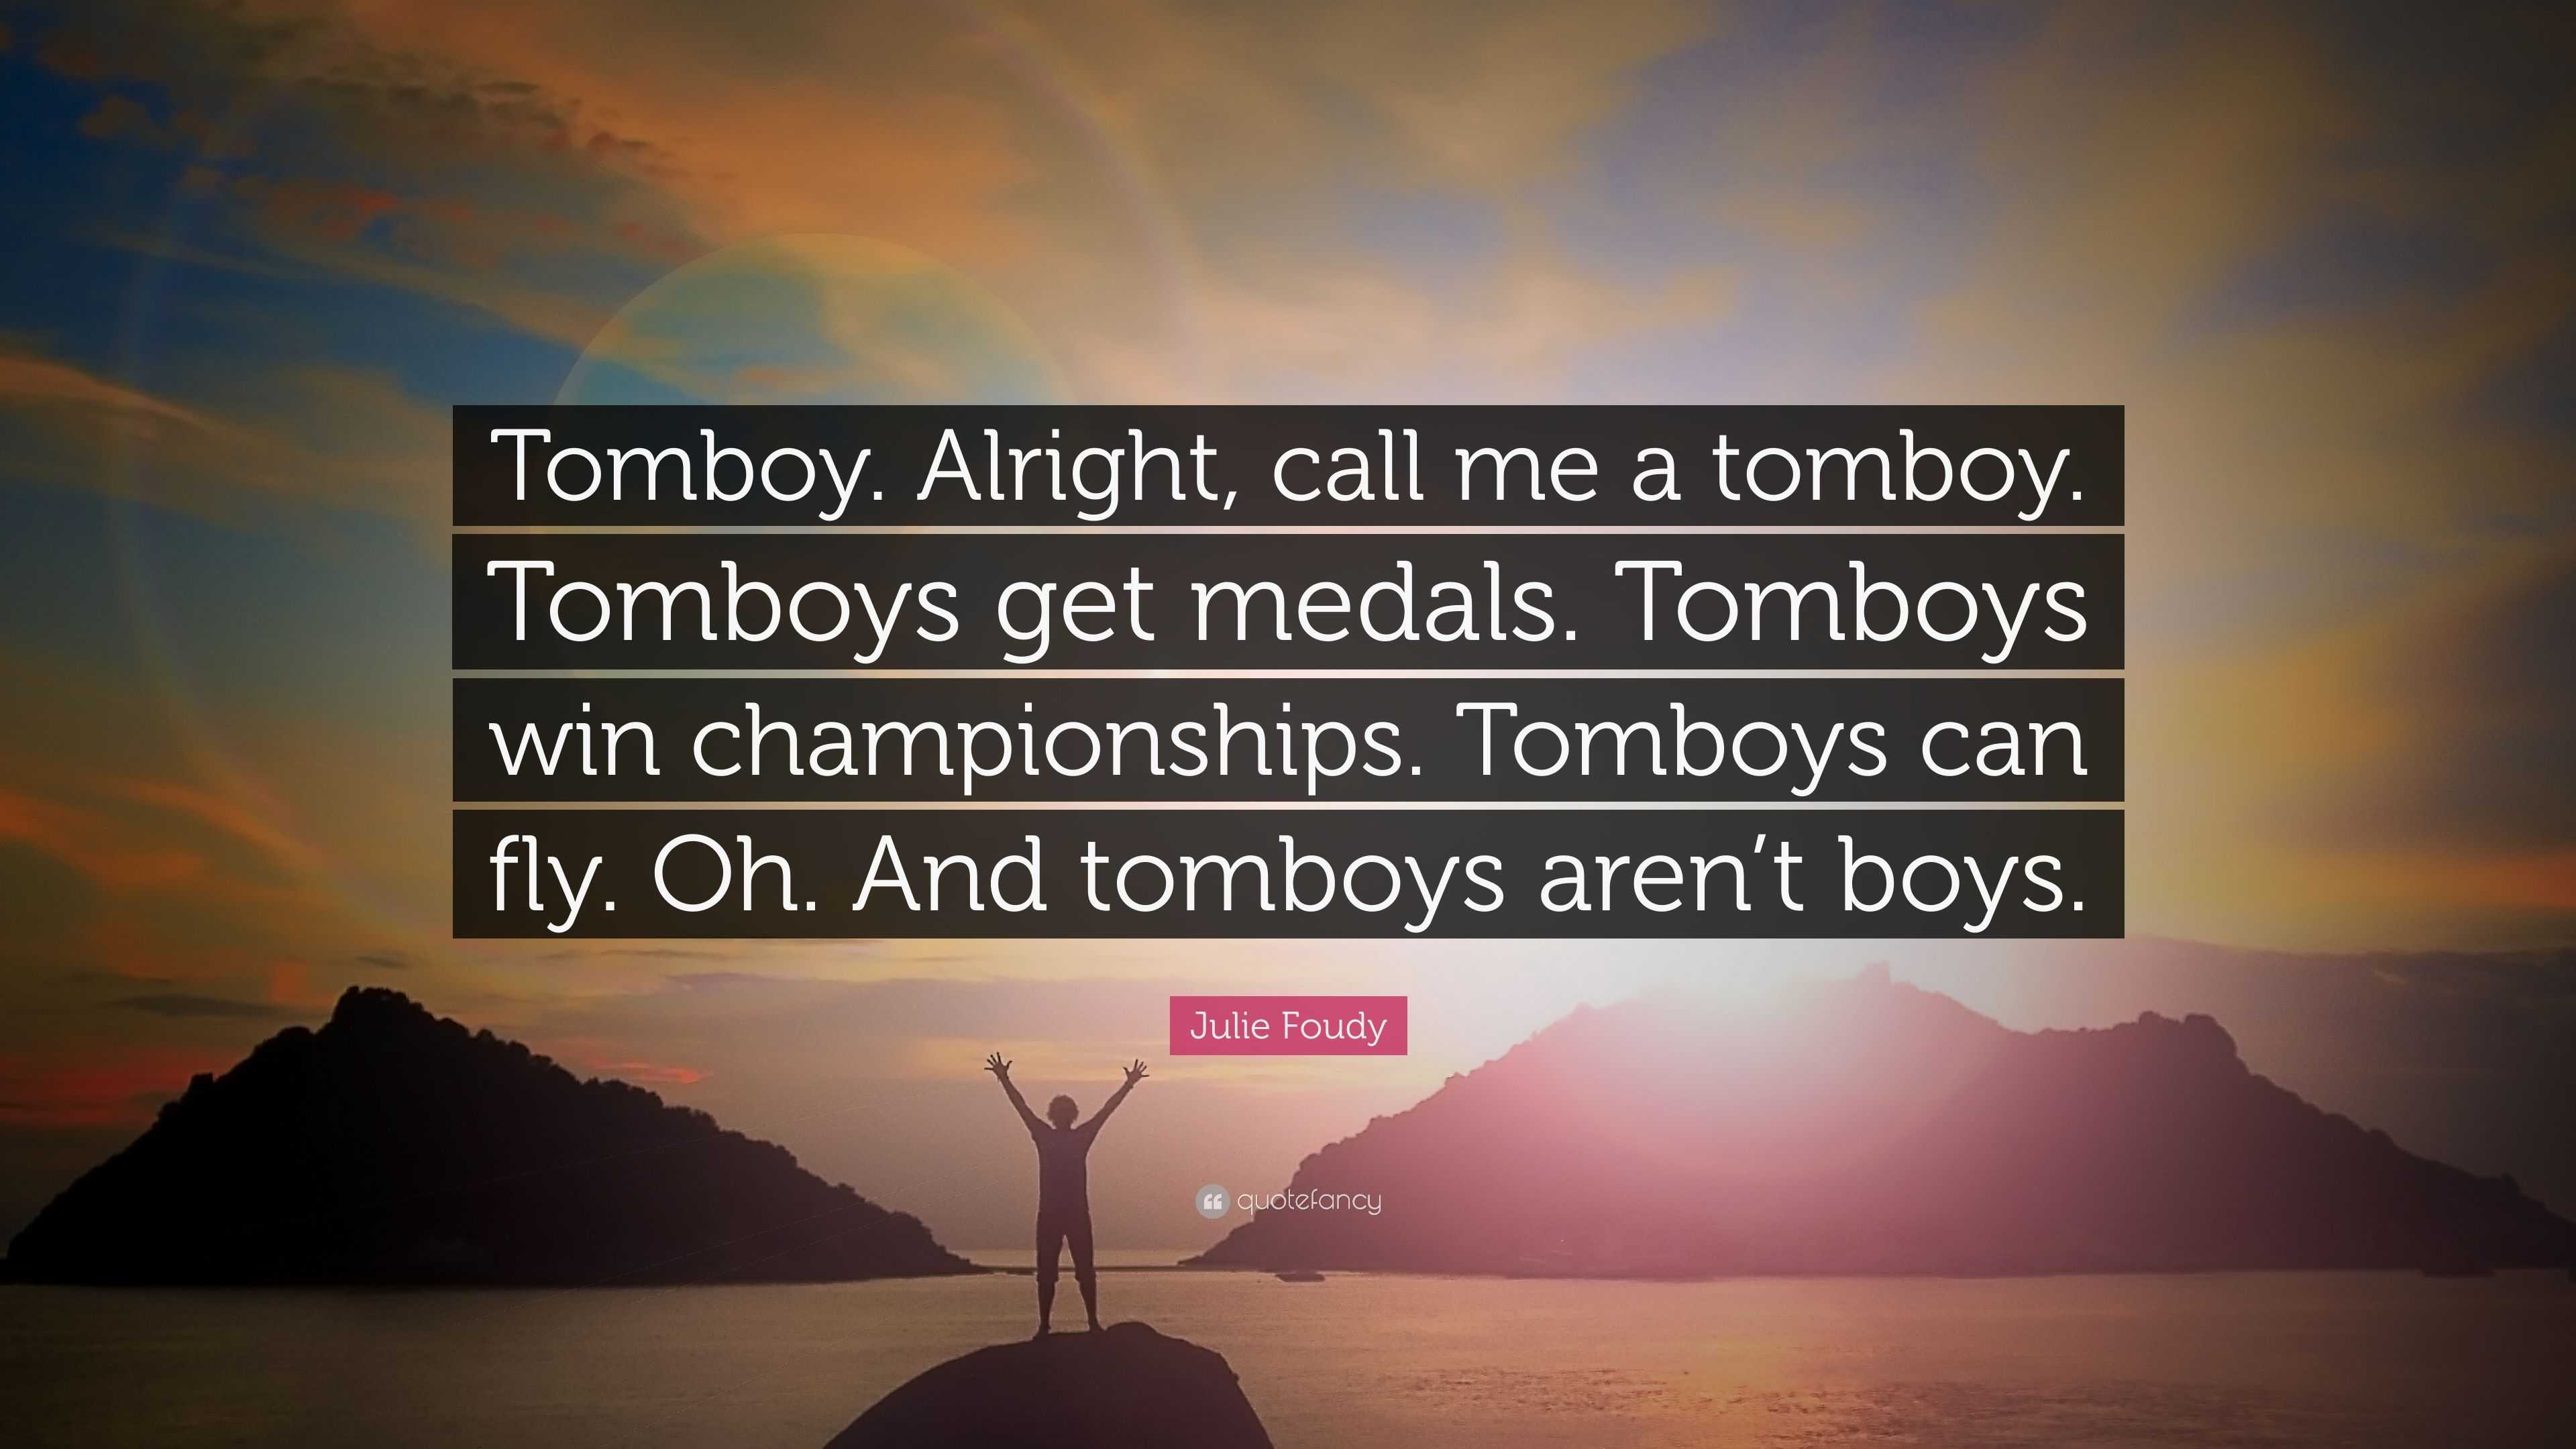 Julie Foudy Quote: “Tomboy. Alright, call me a tomboy. Tomboys get medals.  Tomboys win championships. Tomboys can fly. Oh. And tomboys aren'...”